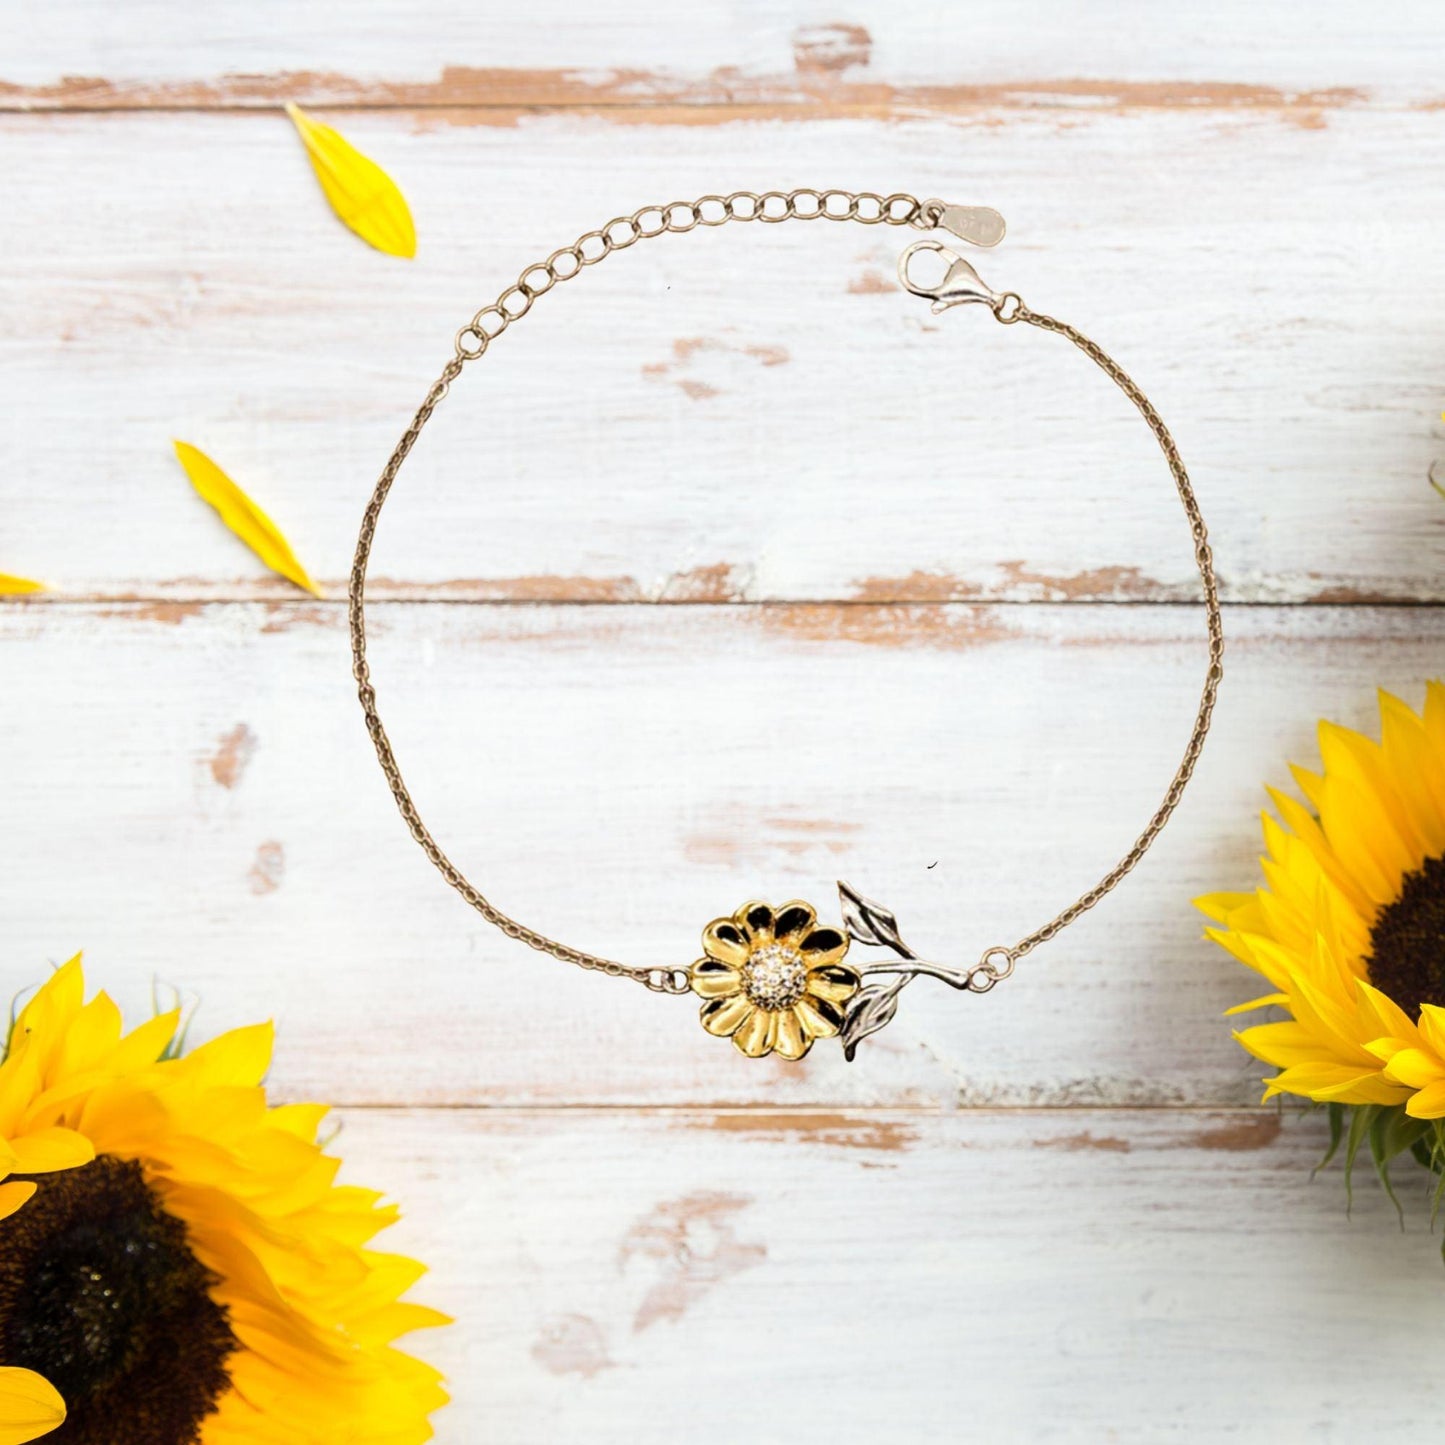 Correctional Officer Sunflower Bracelet - Thanks for being who you are - Birthday Christmas Jewelry Gifts Coworkers Colleague Boss - Mallard Moon Gift Shop